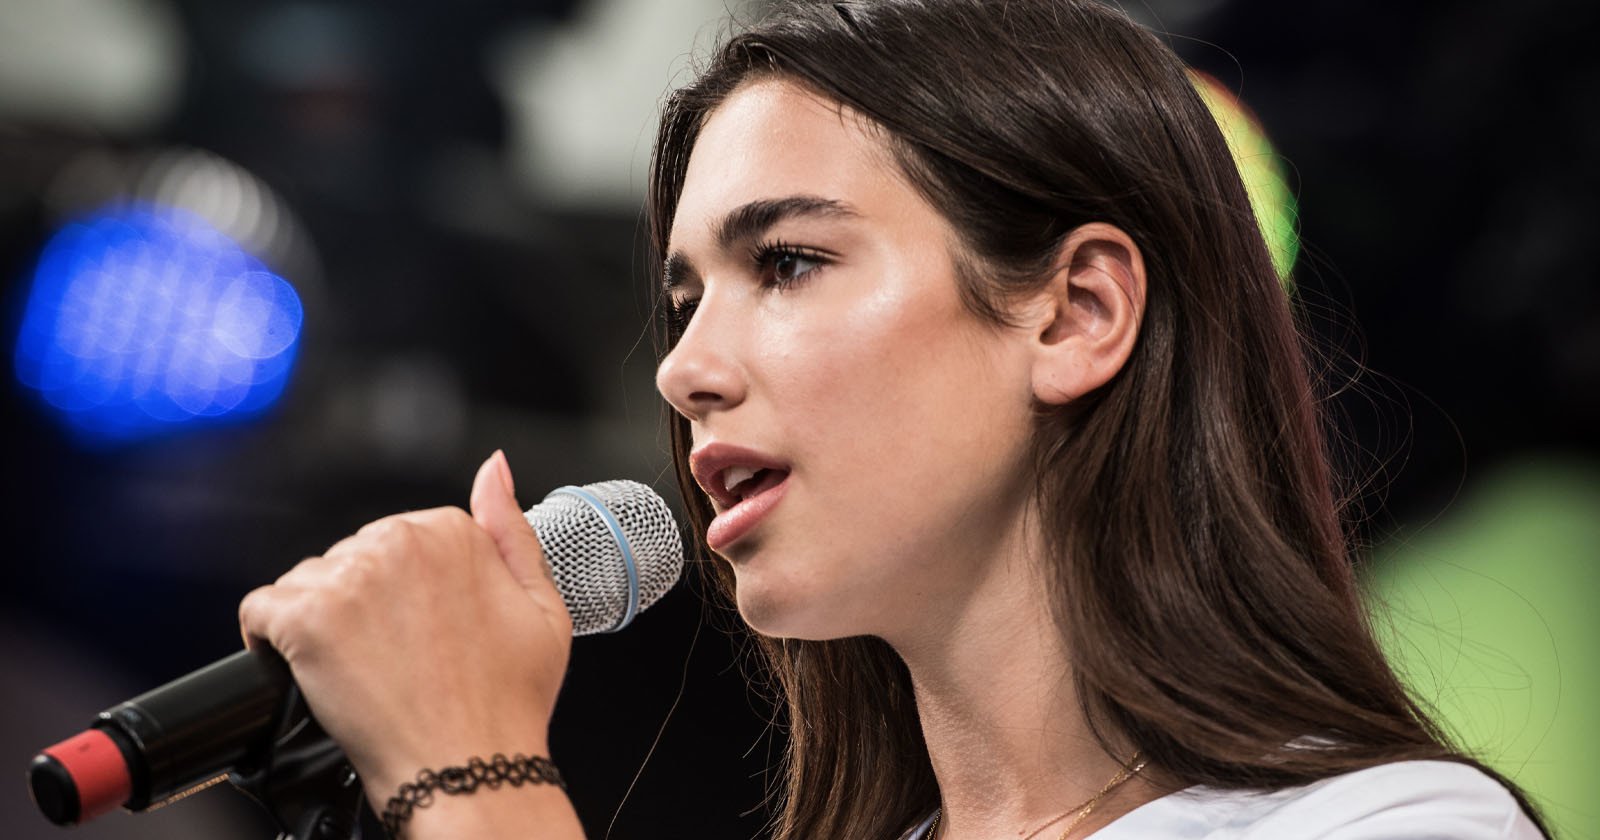 Singer Dua Lipa Sued for a Second Time for Sharing Paparazzi Photo